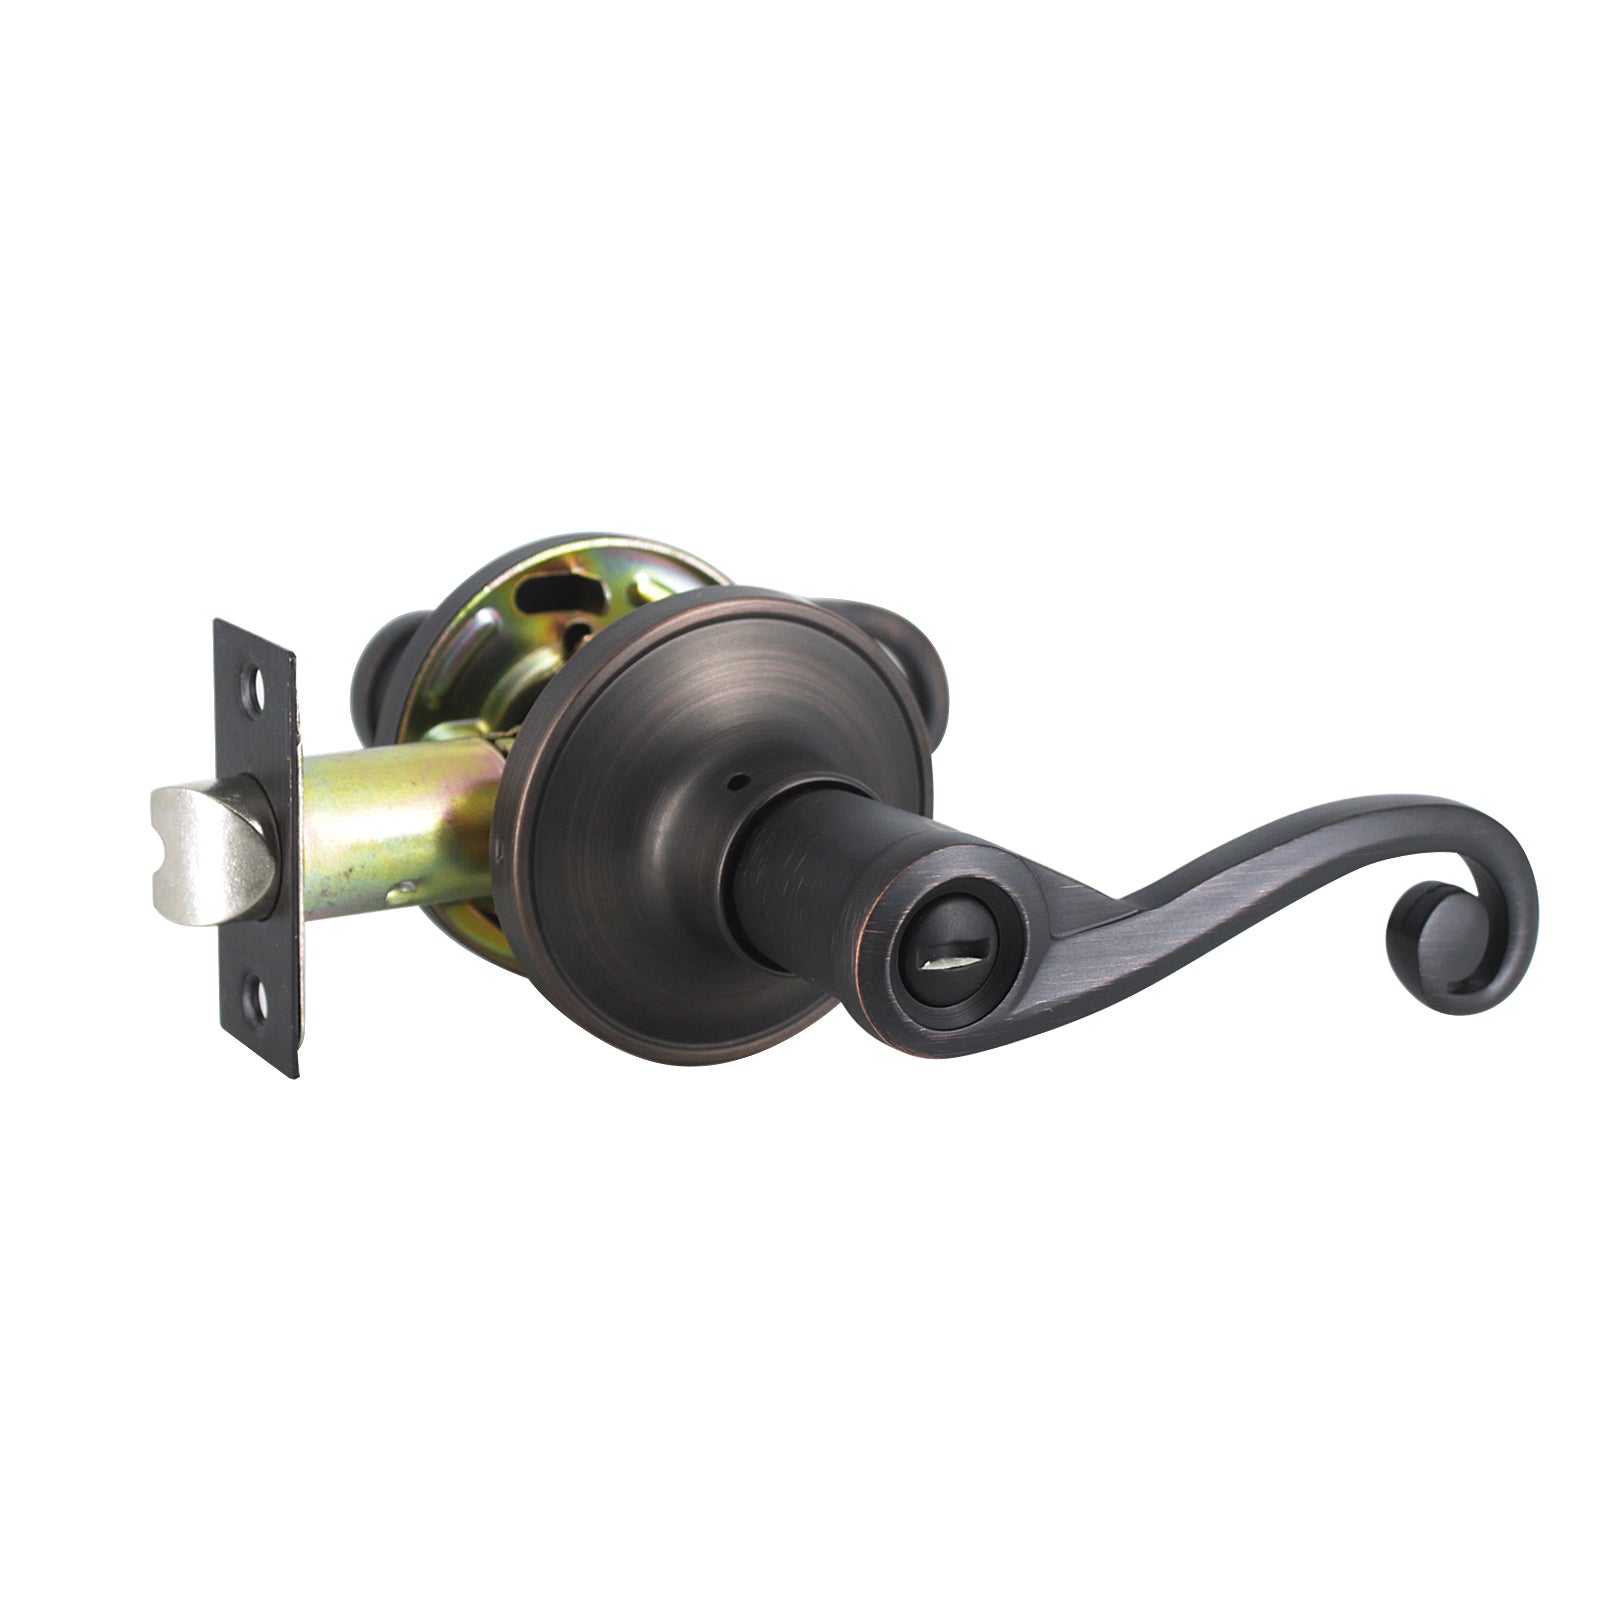 Scroll Wave Style Door Levers Oil Rubbed Bronze Finish Privacy/Passage Function Door Lock - DL851AORB - Probrico